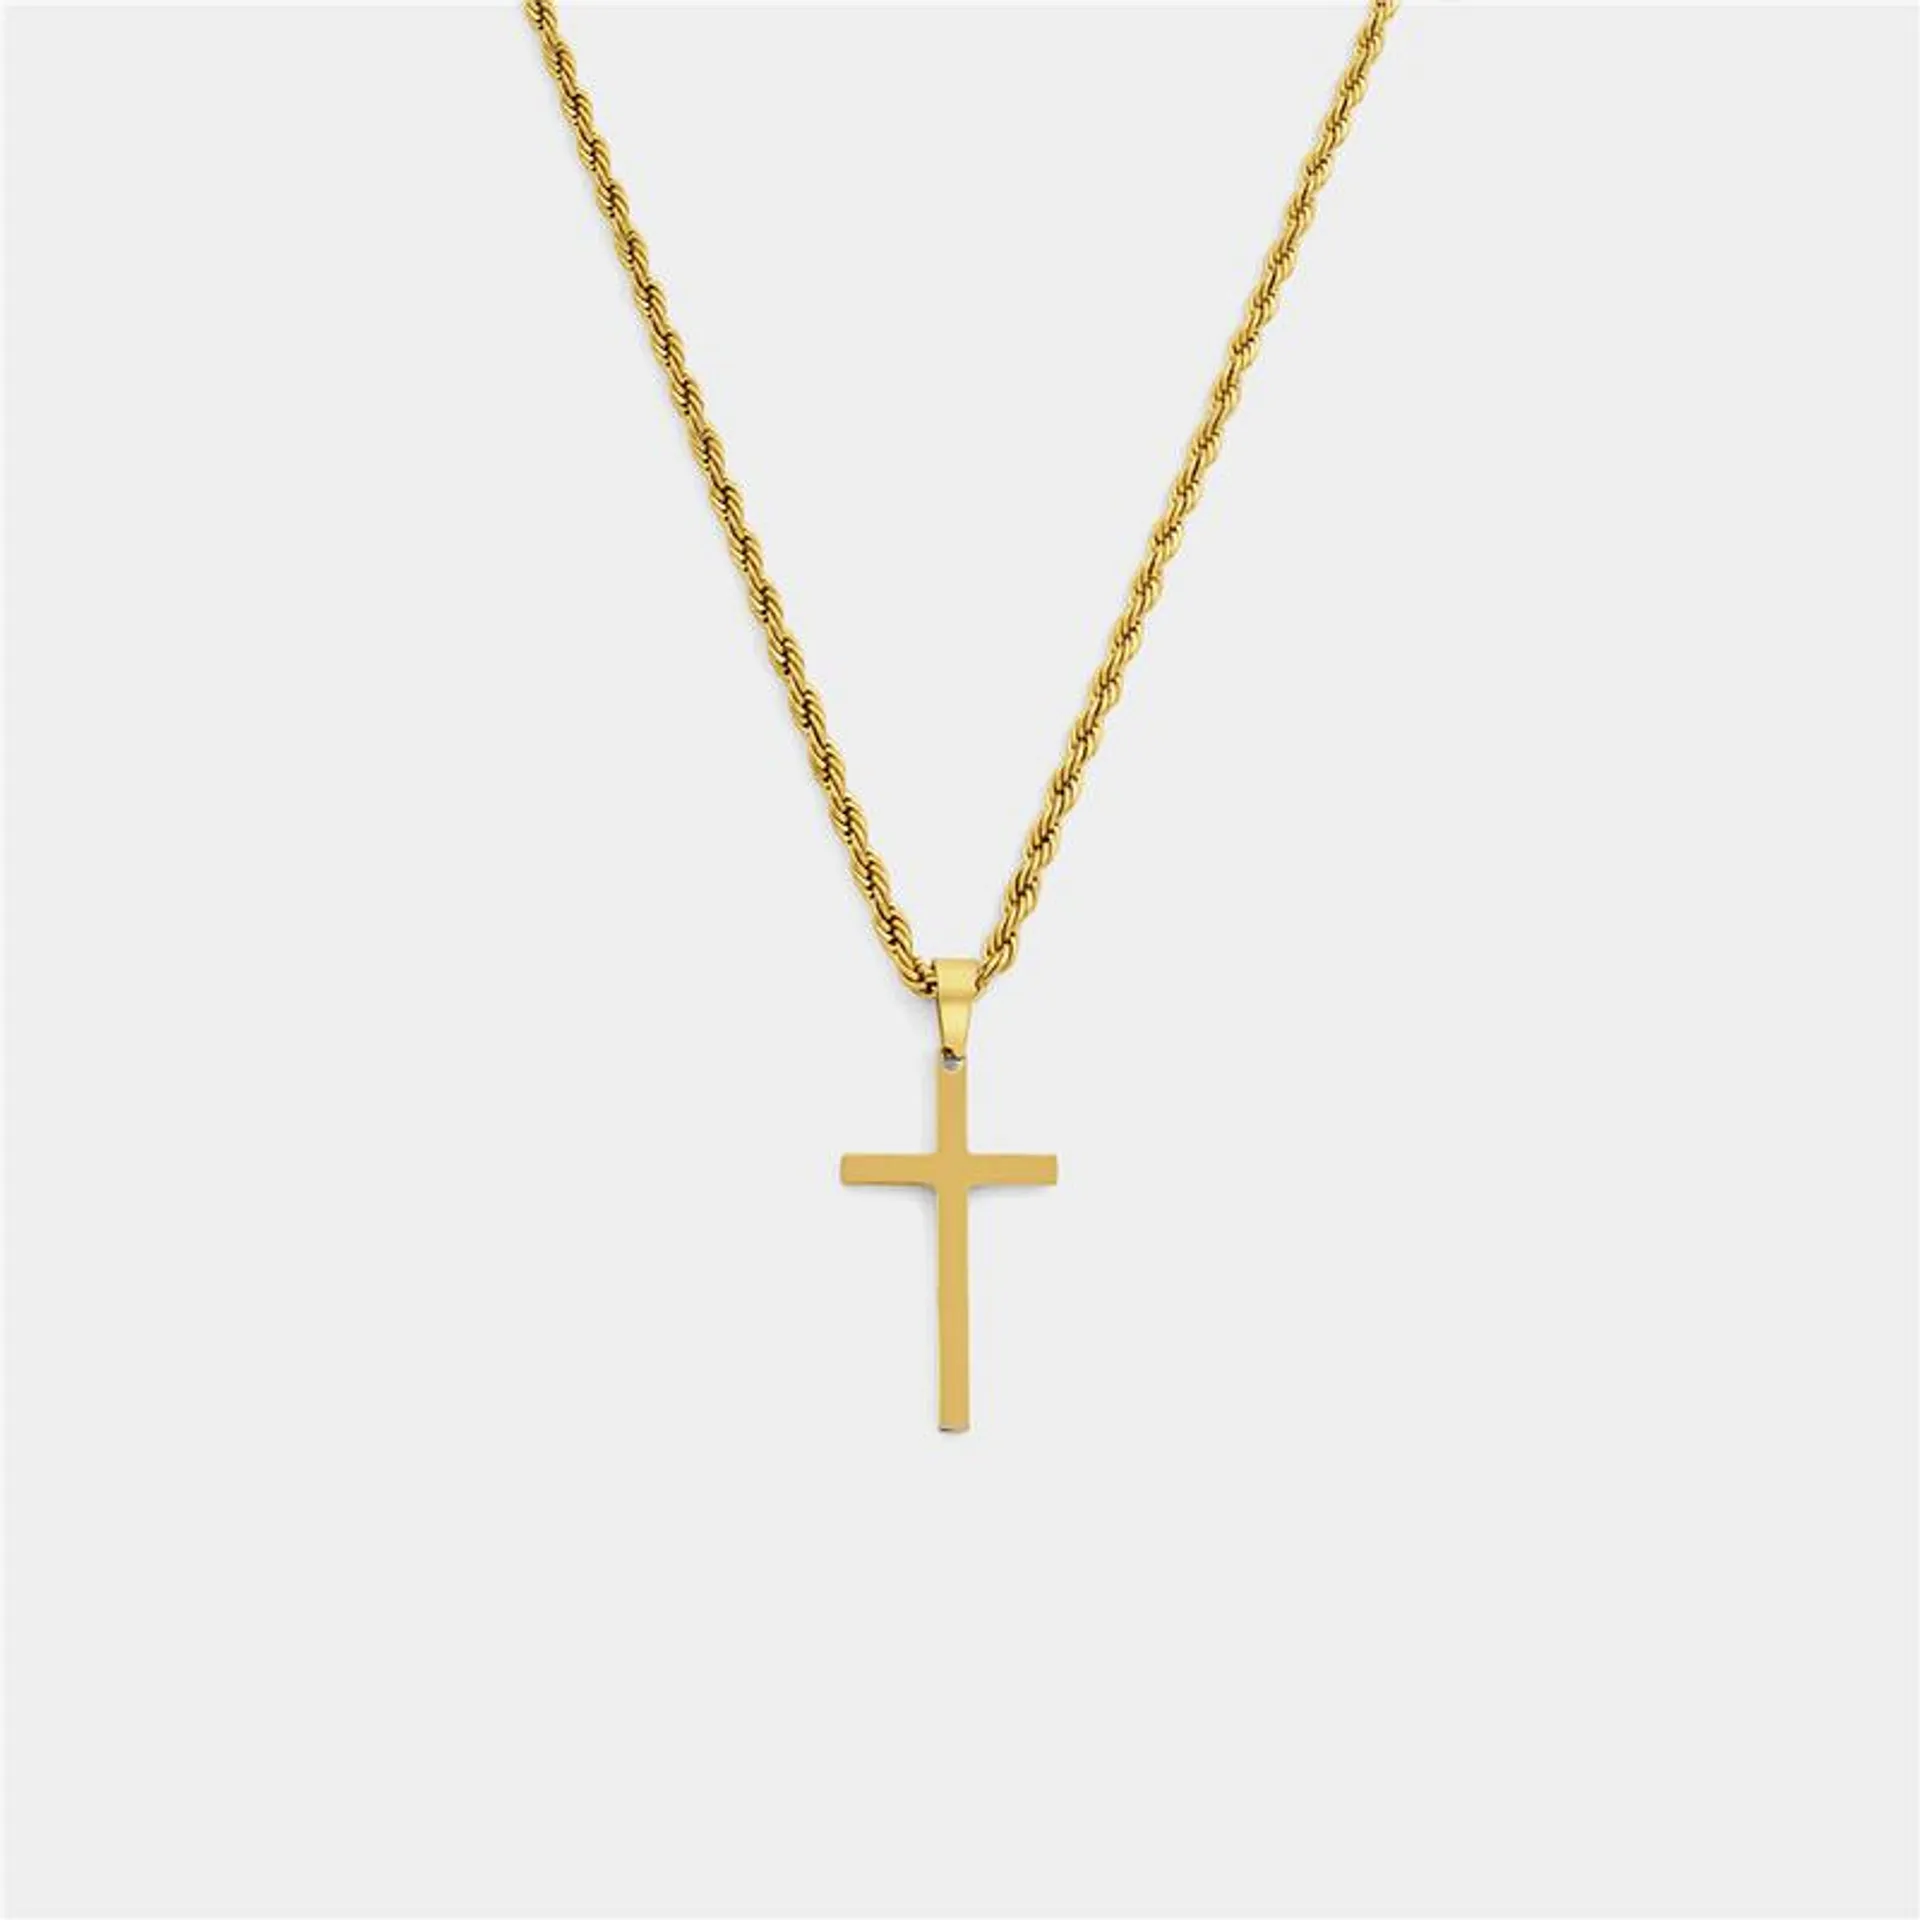 Stainless Steel Rope Chain Cross Pendant